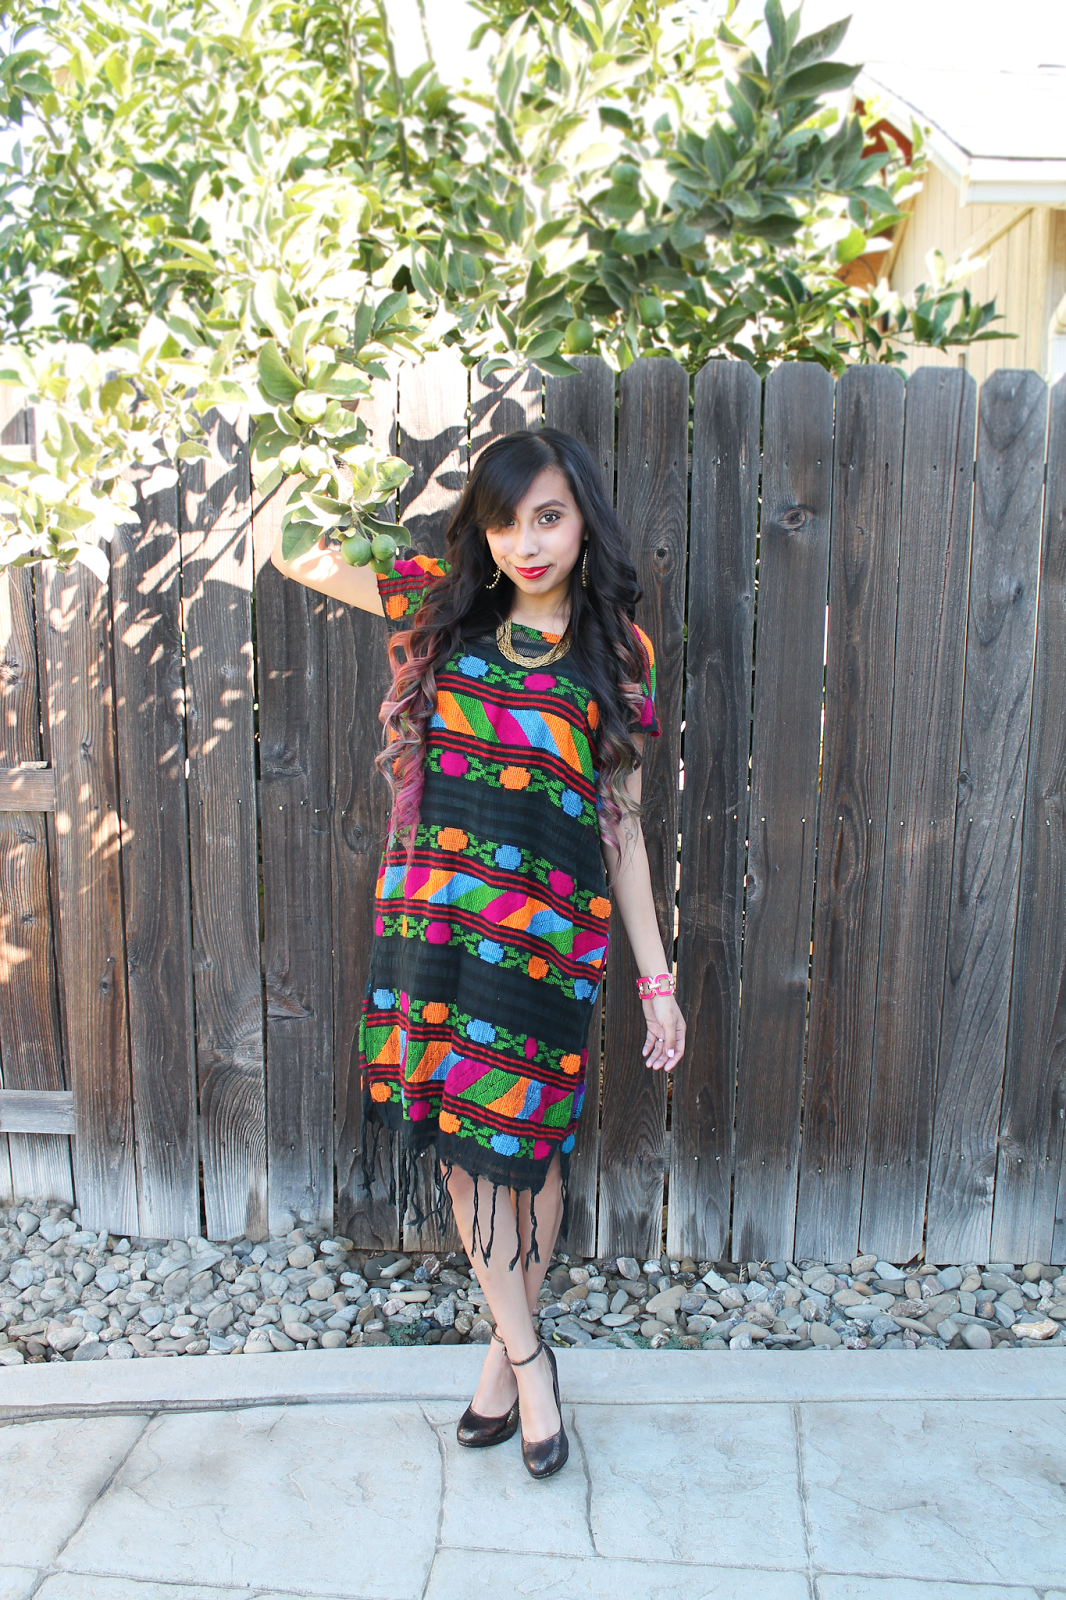 Sew Much Love, Mary: Dia de la Independencia Mexicana (Mexico's  Independence Day) // My Roots